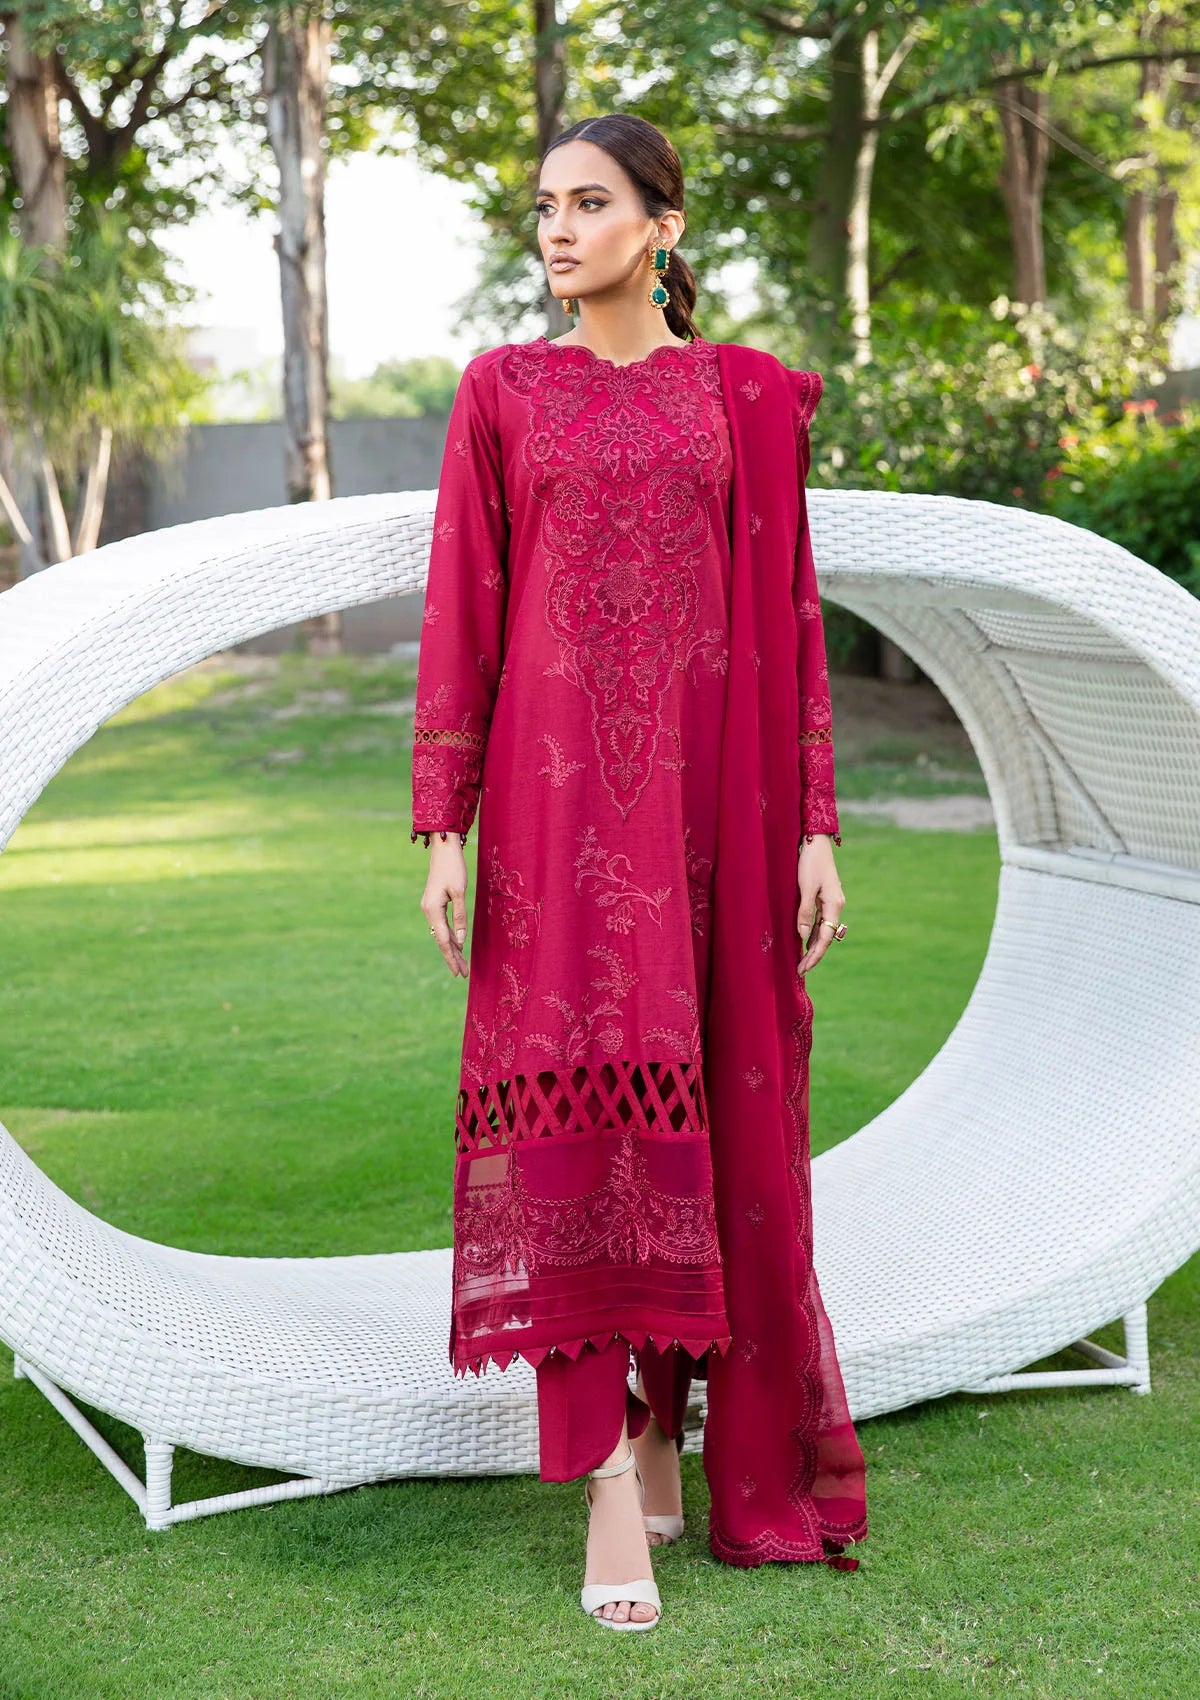 Buy Now, LOOK 5B - AIK Lawn'23 - Vol. 2 - Shahana Collection UK - Wedding and Bridal Party Dresses - Aik Atelier 